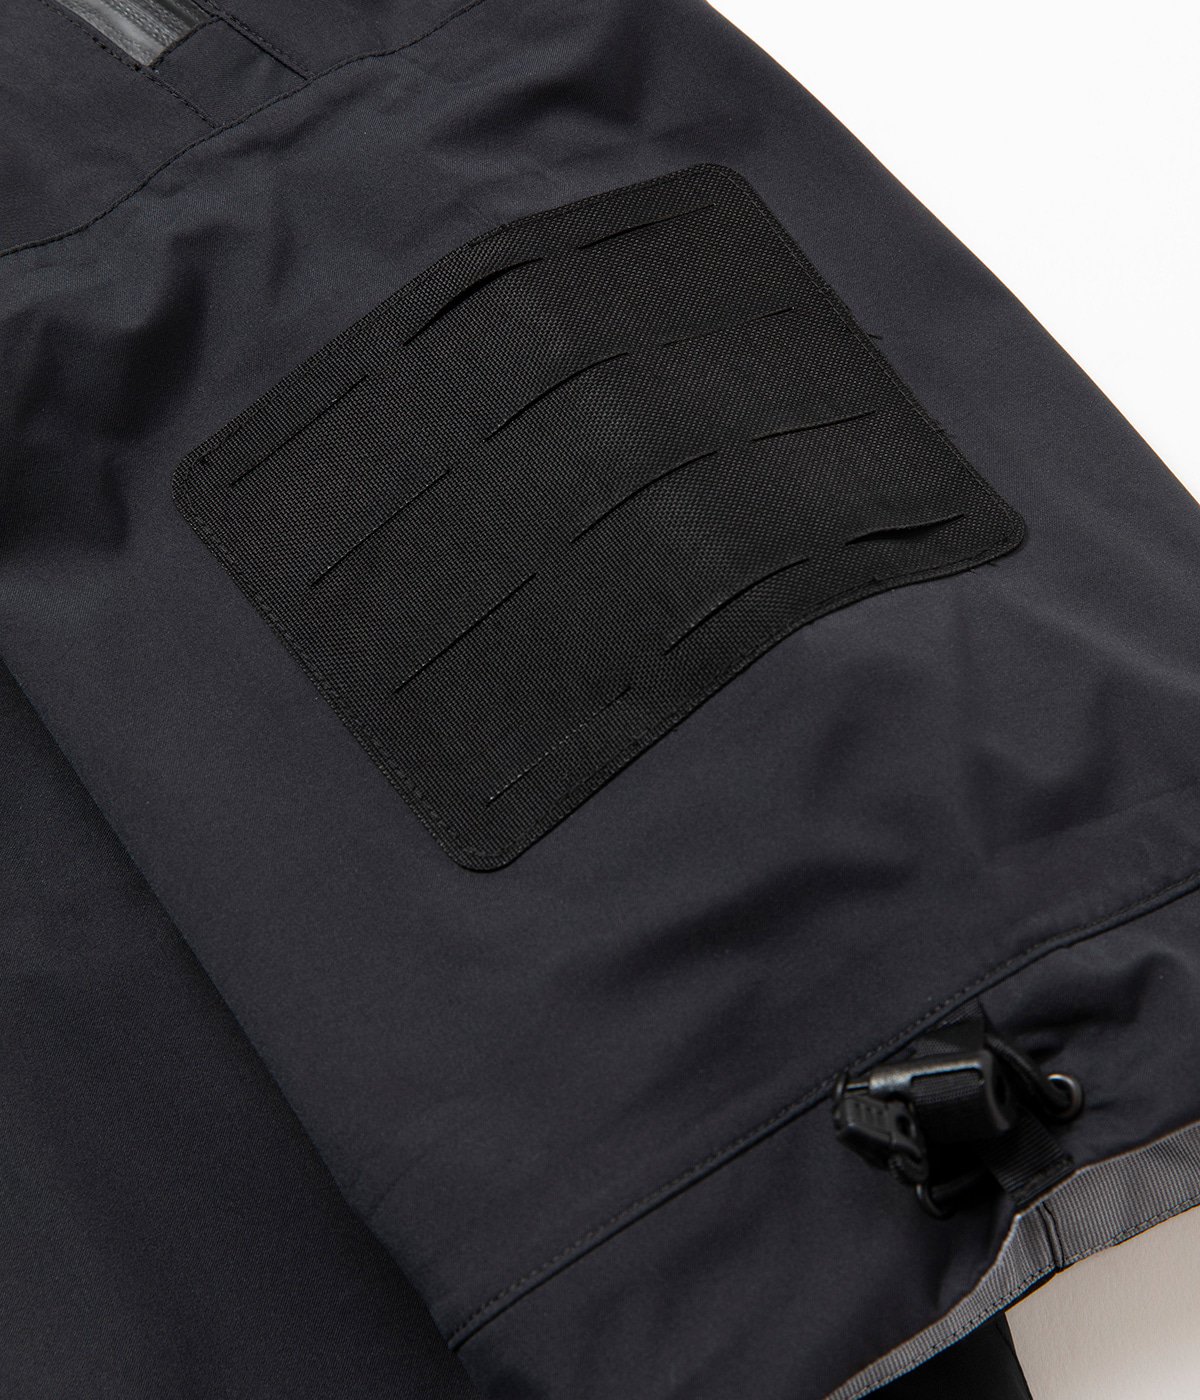 Angle45 Short sleeve Hard shell | MOUT RECON TAILOR(マウトリーコン